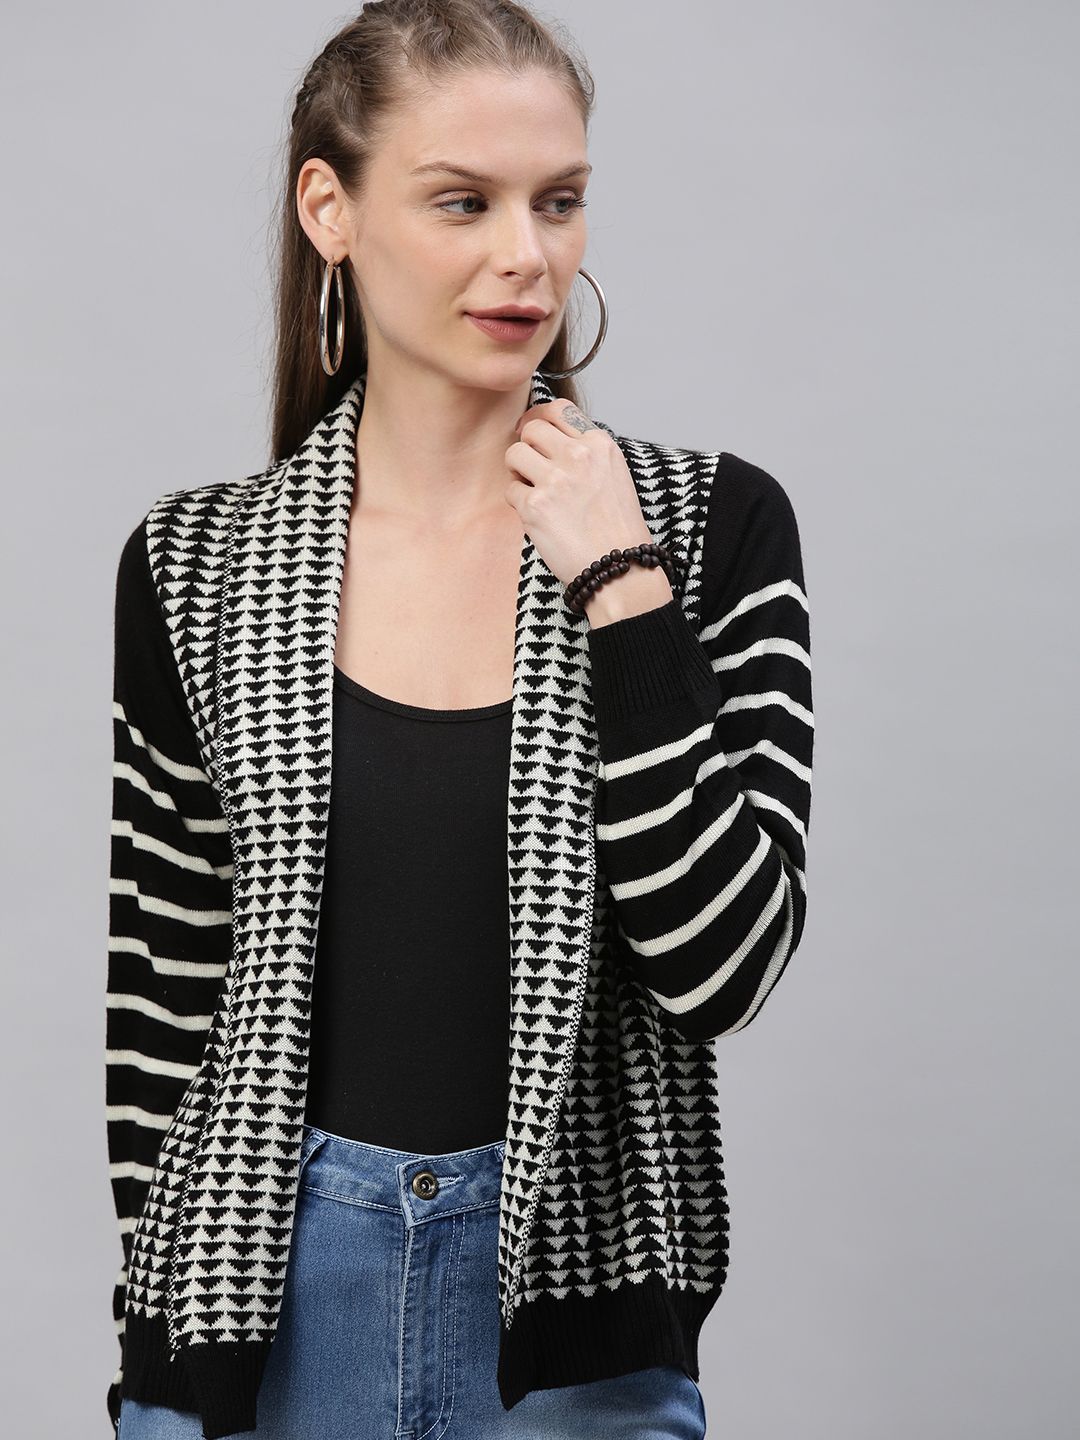 The Roadster Lifestyle Co Women Off-White & Black Self-Design Front Open Sweater Price in India